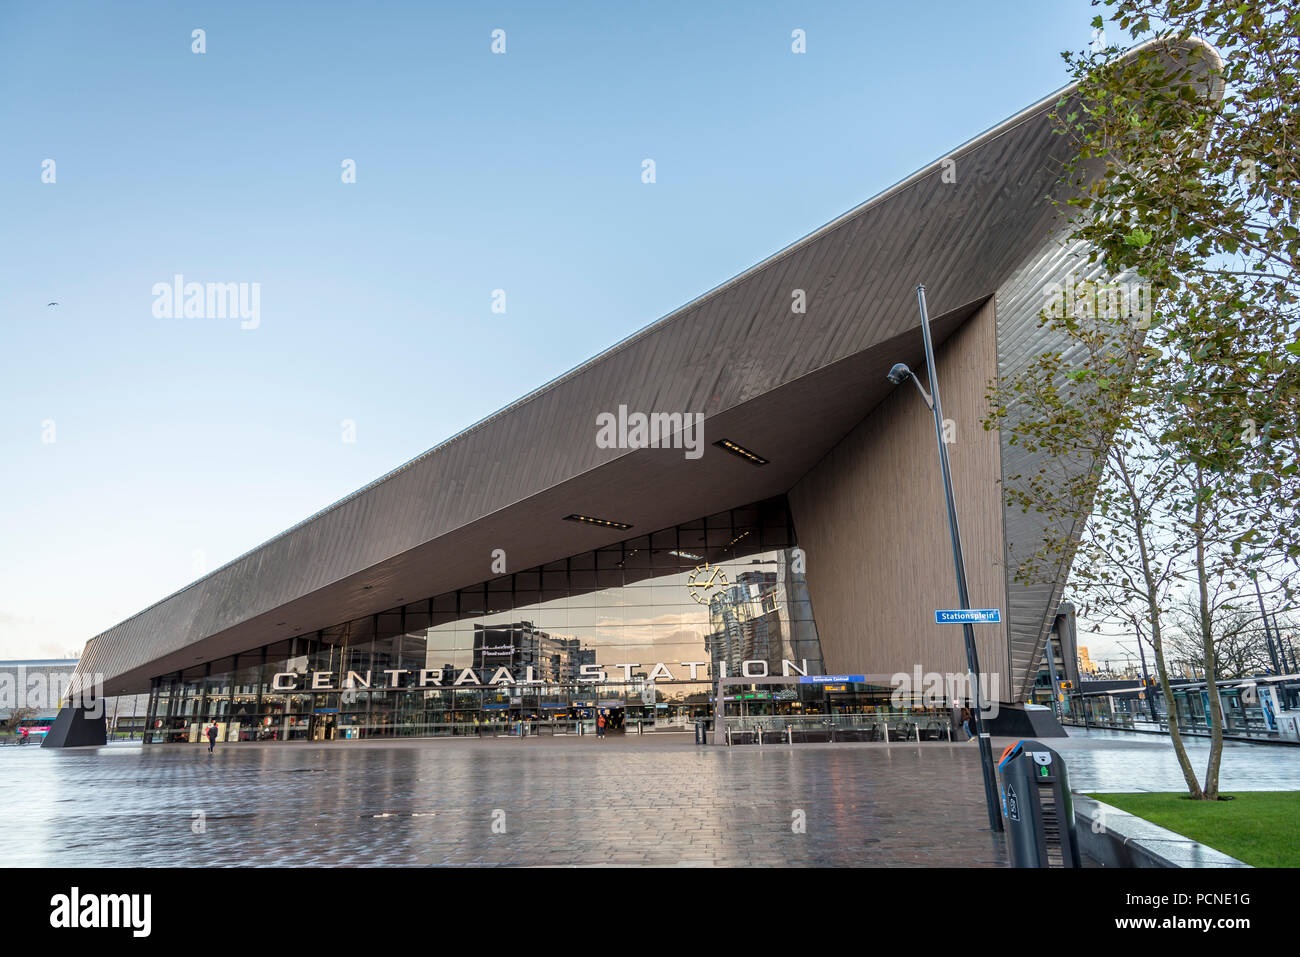 Main entrance to Centraal Station in Rotterdam, Netherlands Stock Photo